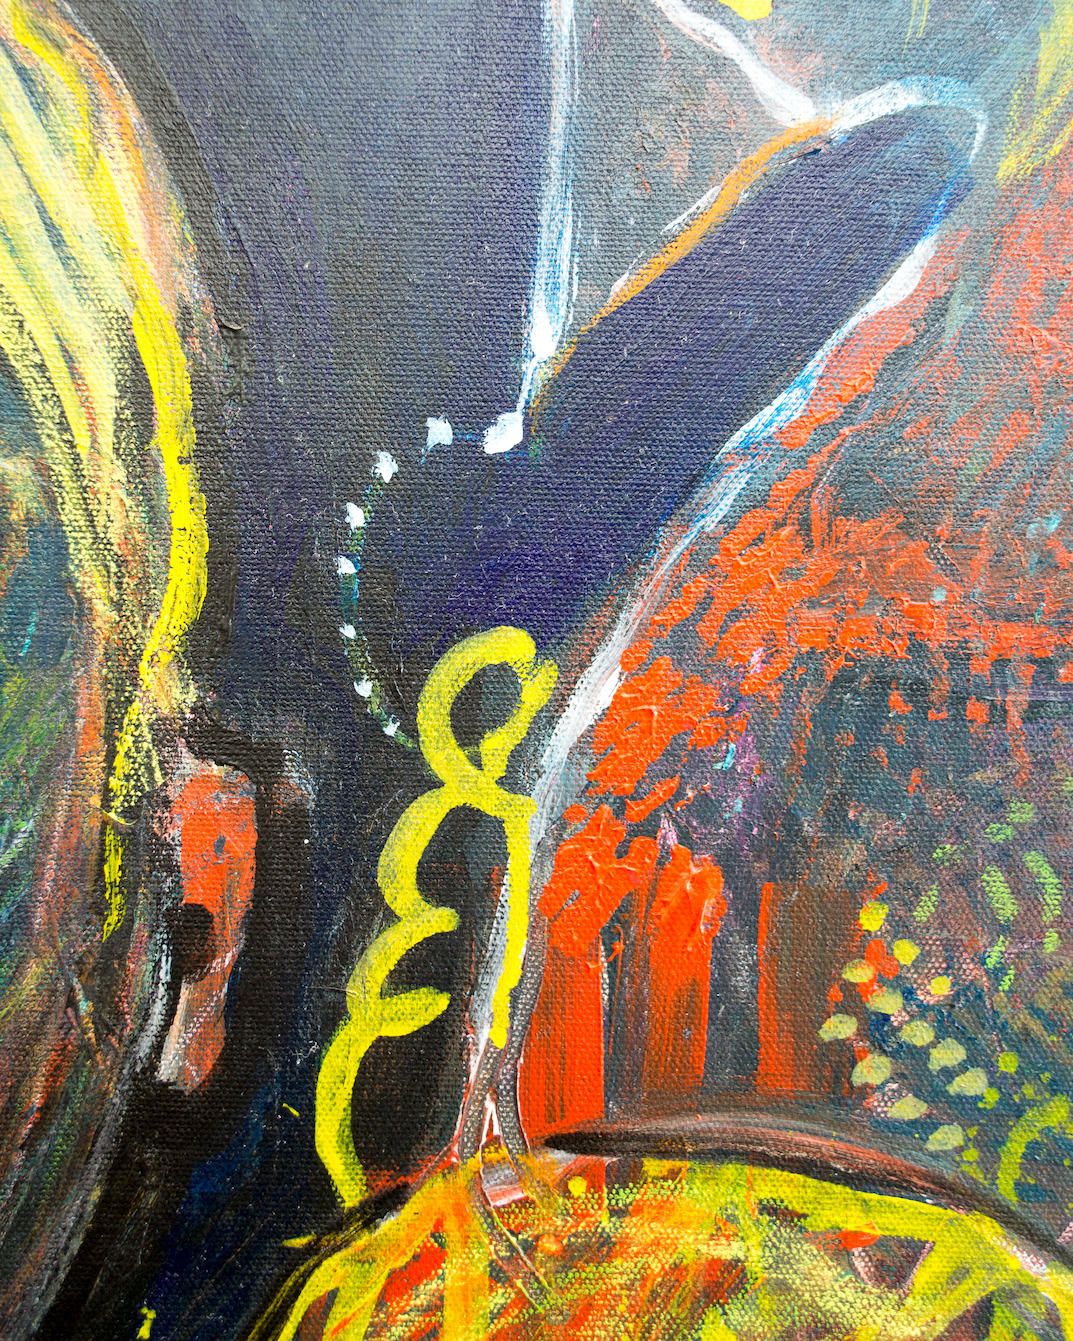 Close Up Detail 2 Of Acrylic Painting "Watching The Daisies Grow" By Lucette Dalozzo